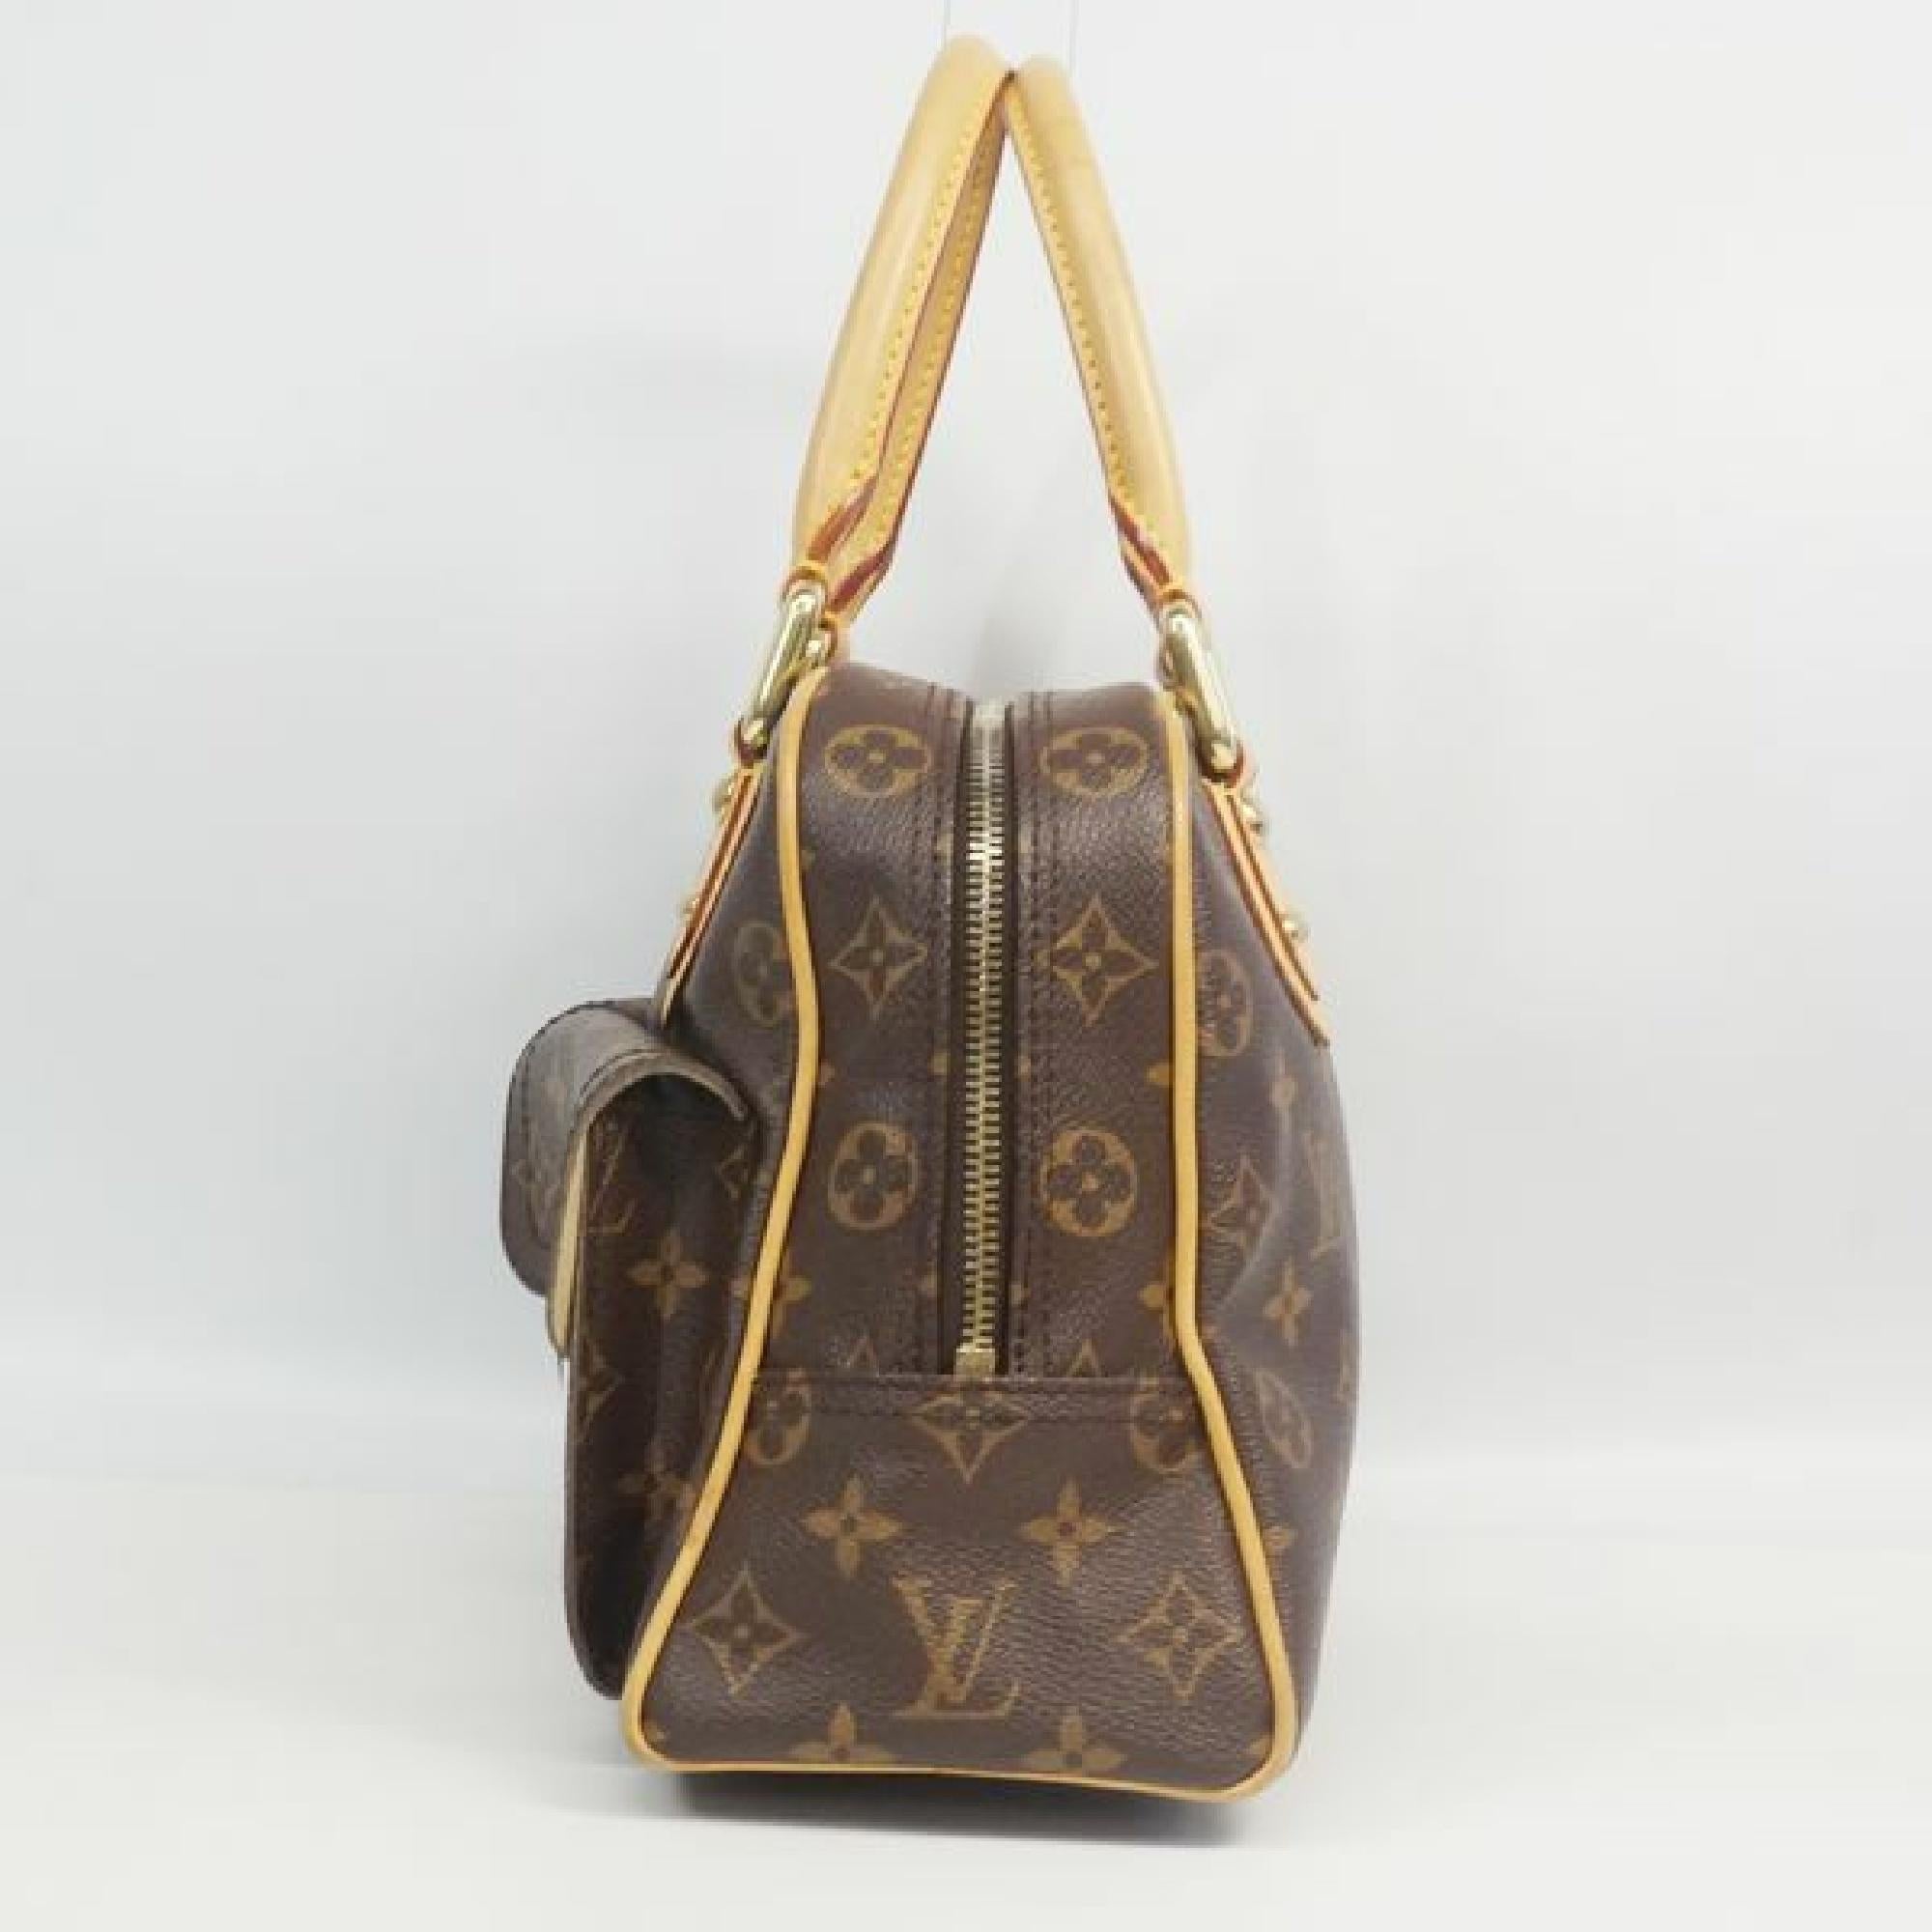 An authentic LOUIS VUITTON Manhattan PM Womens handbag M40026 The outside material is Monogram canvas. The pattern is ManhattanPM. This item is Contemporary. The year of manufacture would be 2006.
Rank
AB signs of wear (Small)
Used goods in good